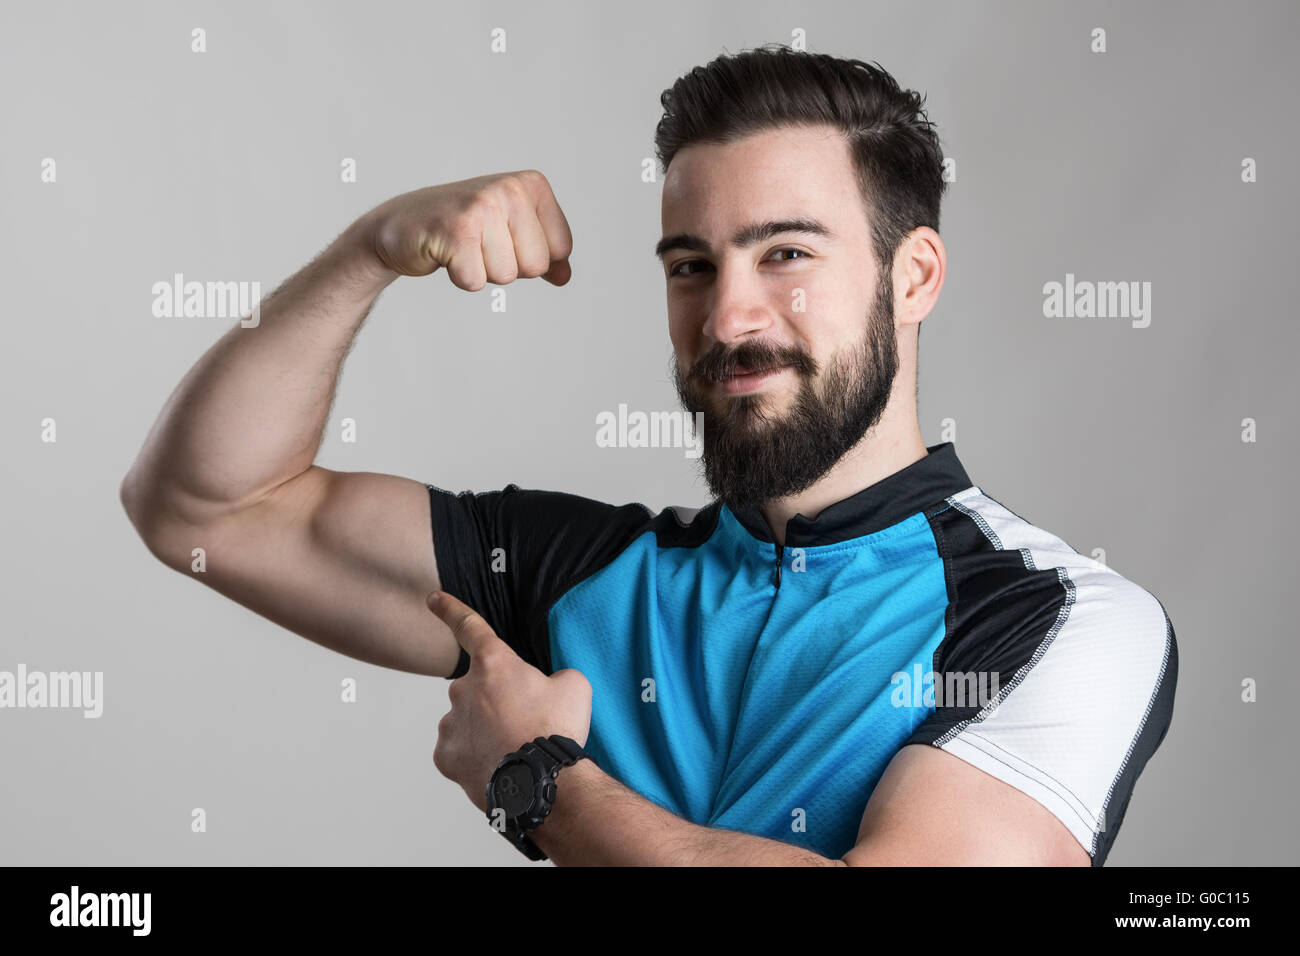 Achievement concept. Portrait of young cyclist flexing his bicep muscle smiling at camera over gray studio background Stock Photo